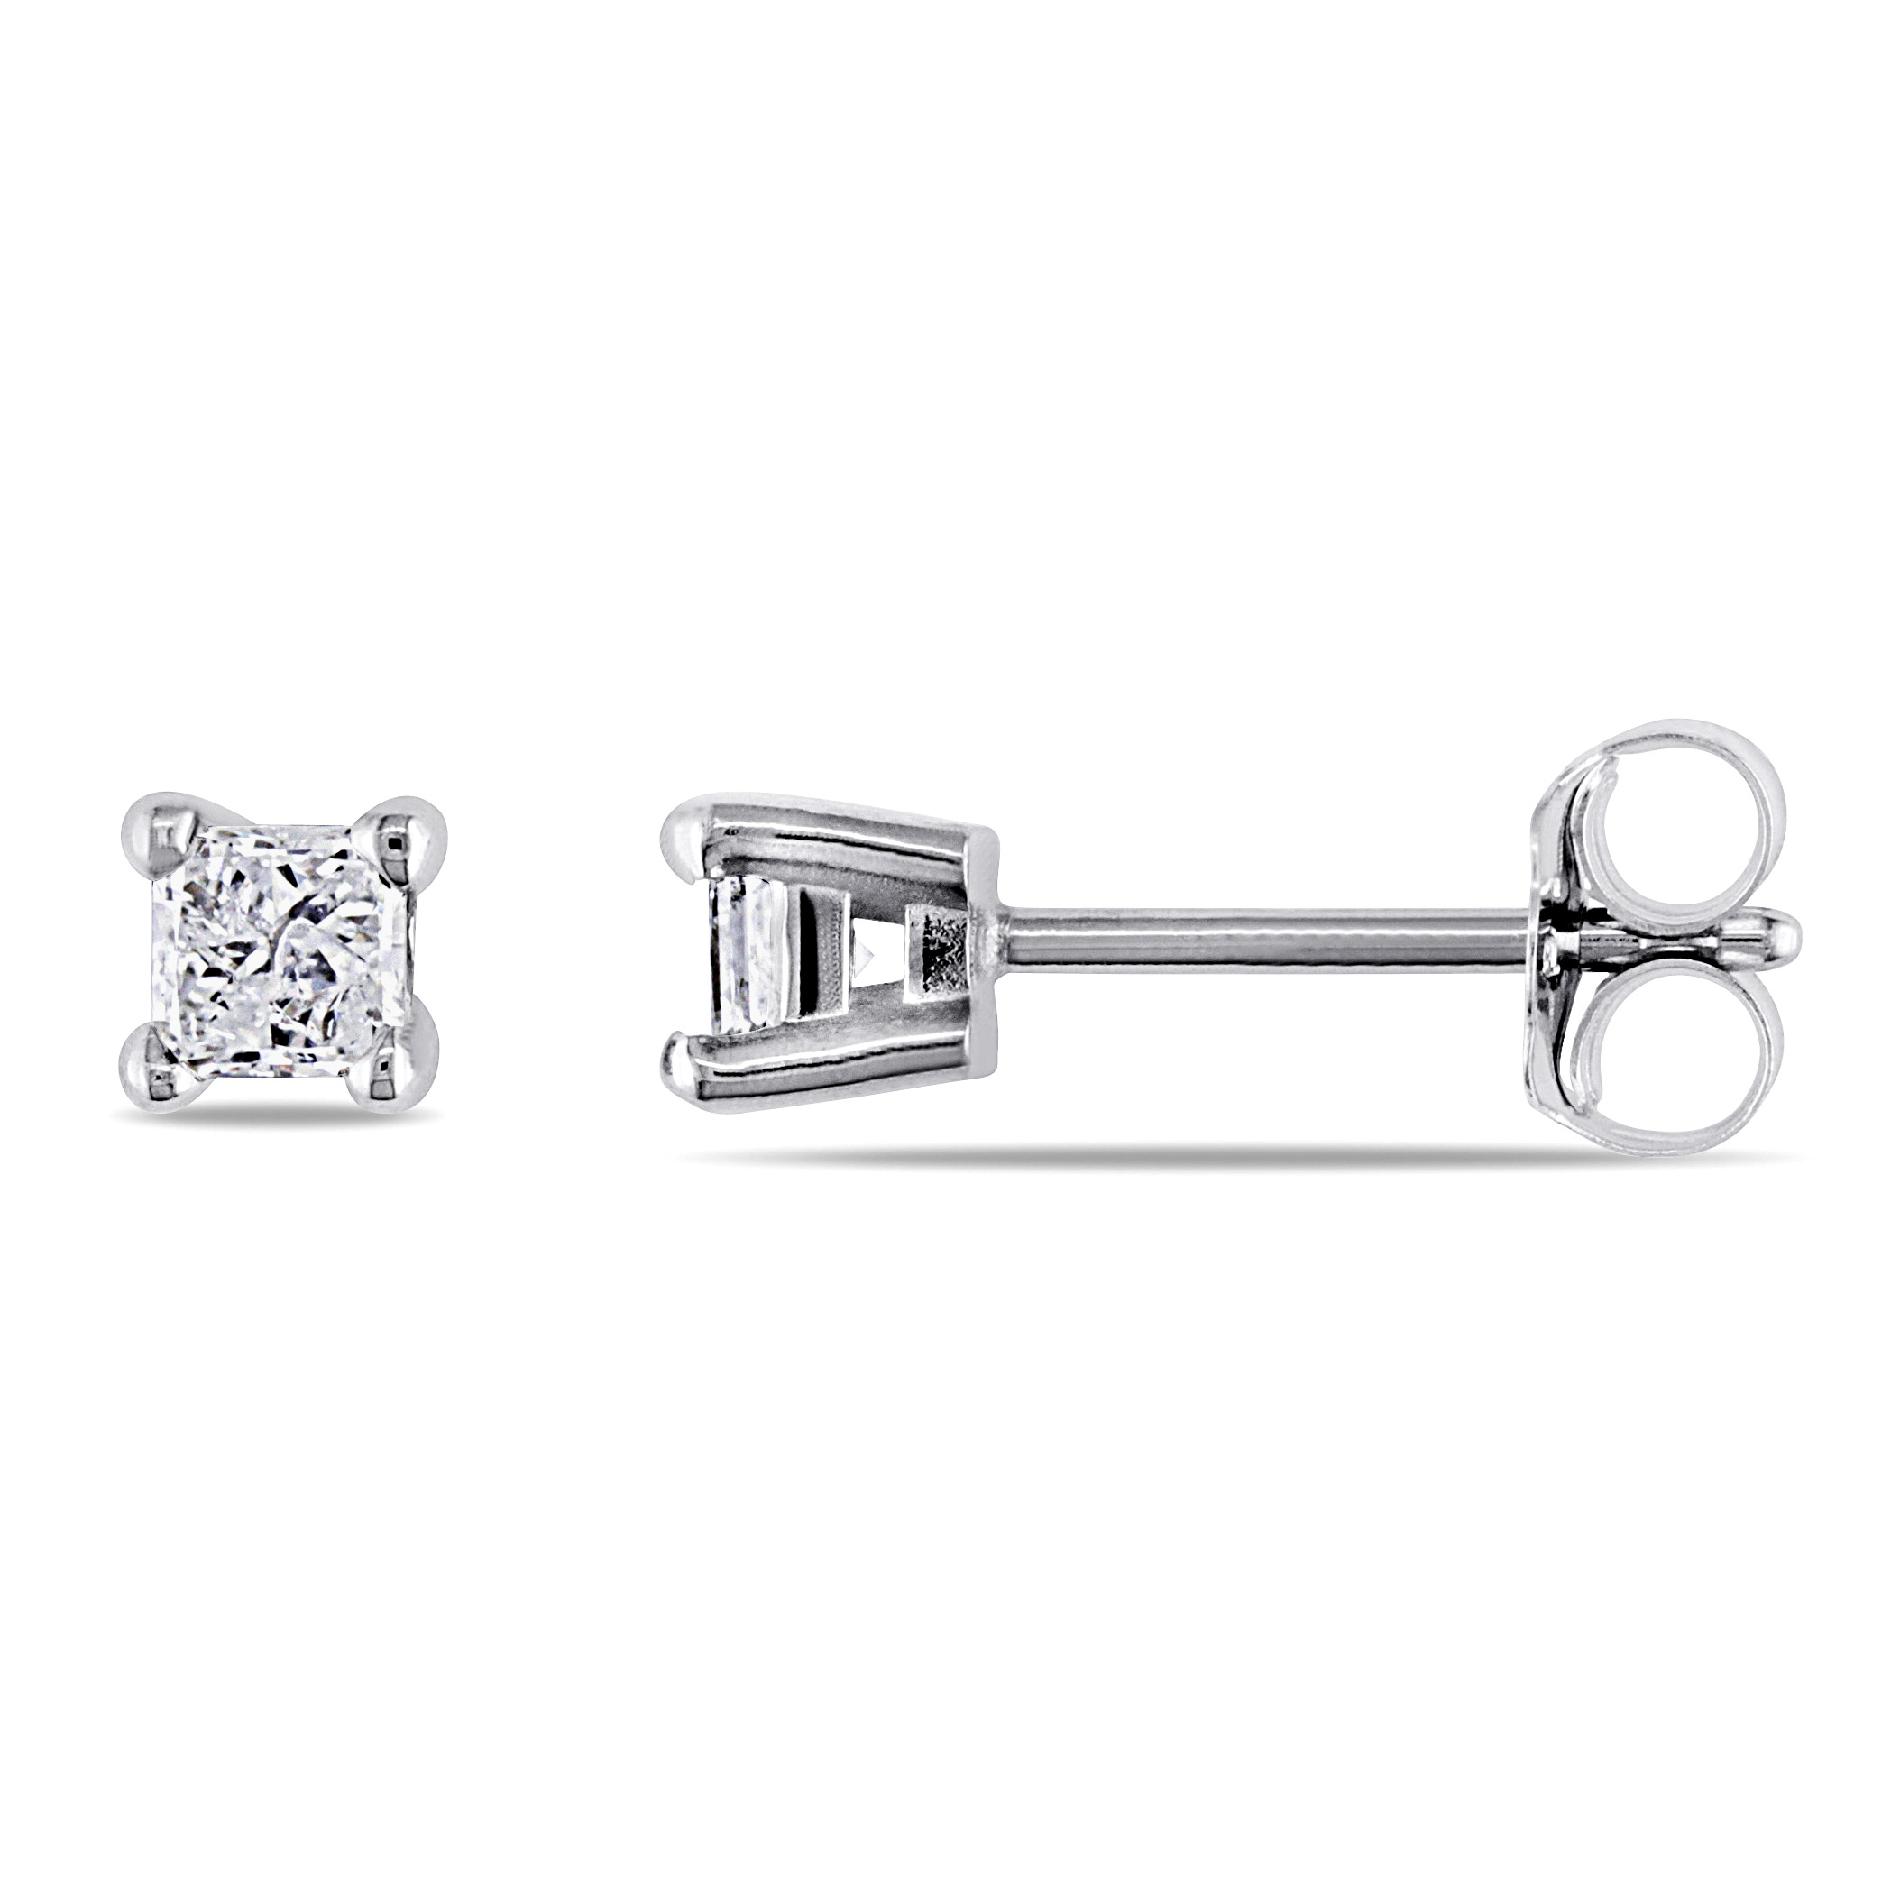 1/3 CT Princess Cut Solitaire Earrings Set in 14K White Gold (GH I1-I2)